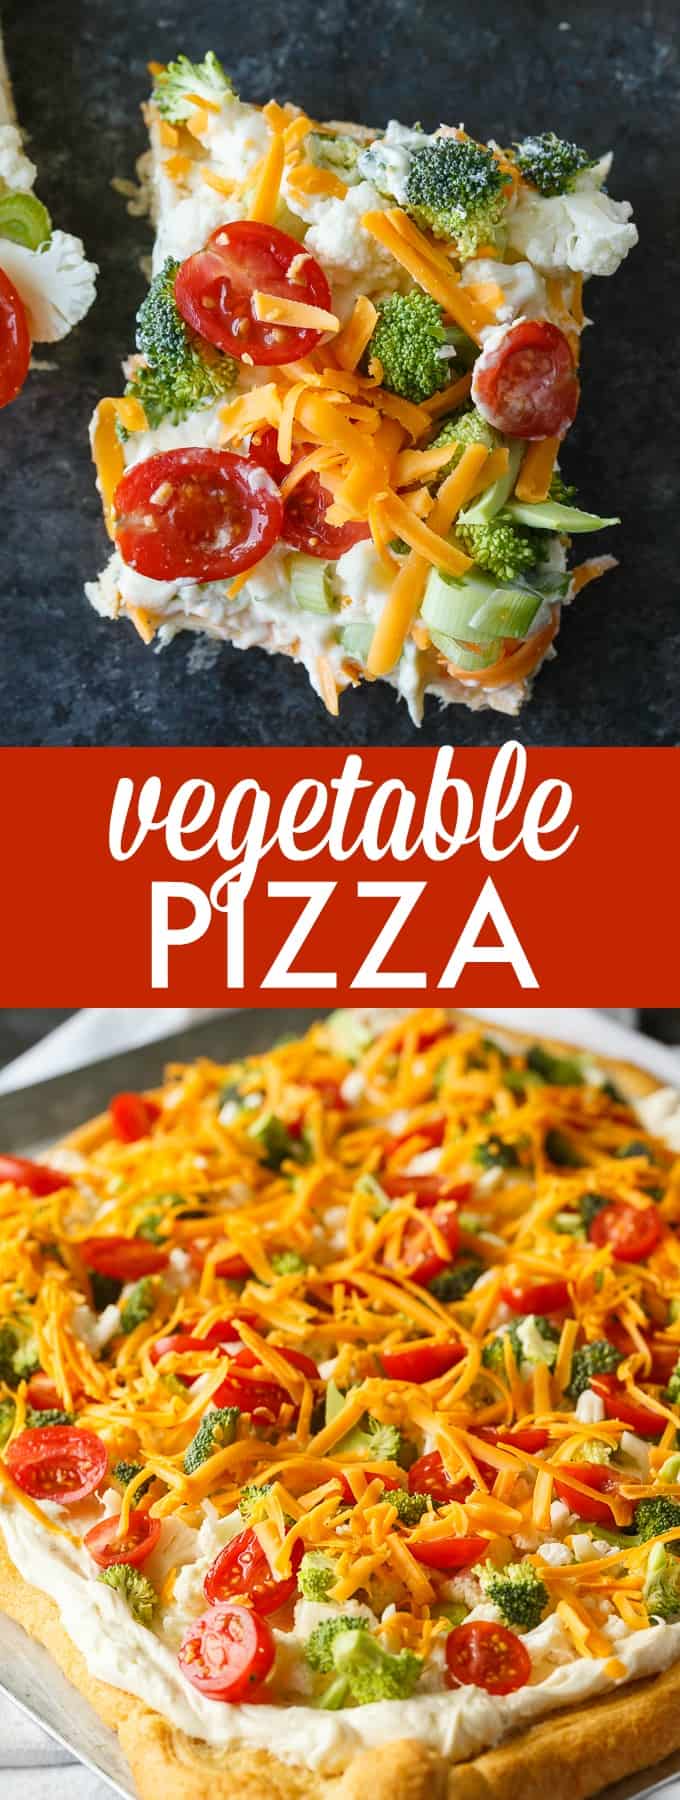 Vegetable Pizza - This easy appetizer is perfect for parties and potlucks. It's made with crescent roll dough, ranch dressing mix and loads of fresh, crispy veggies. Yum!